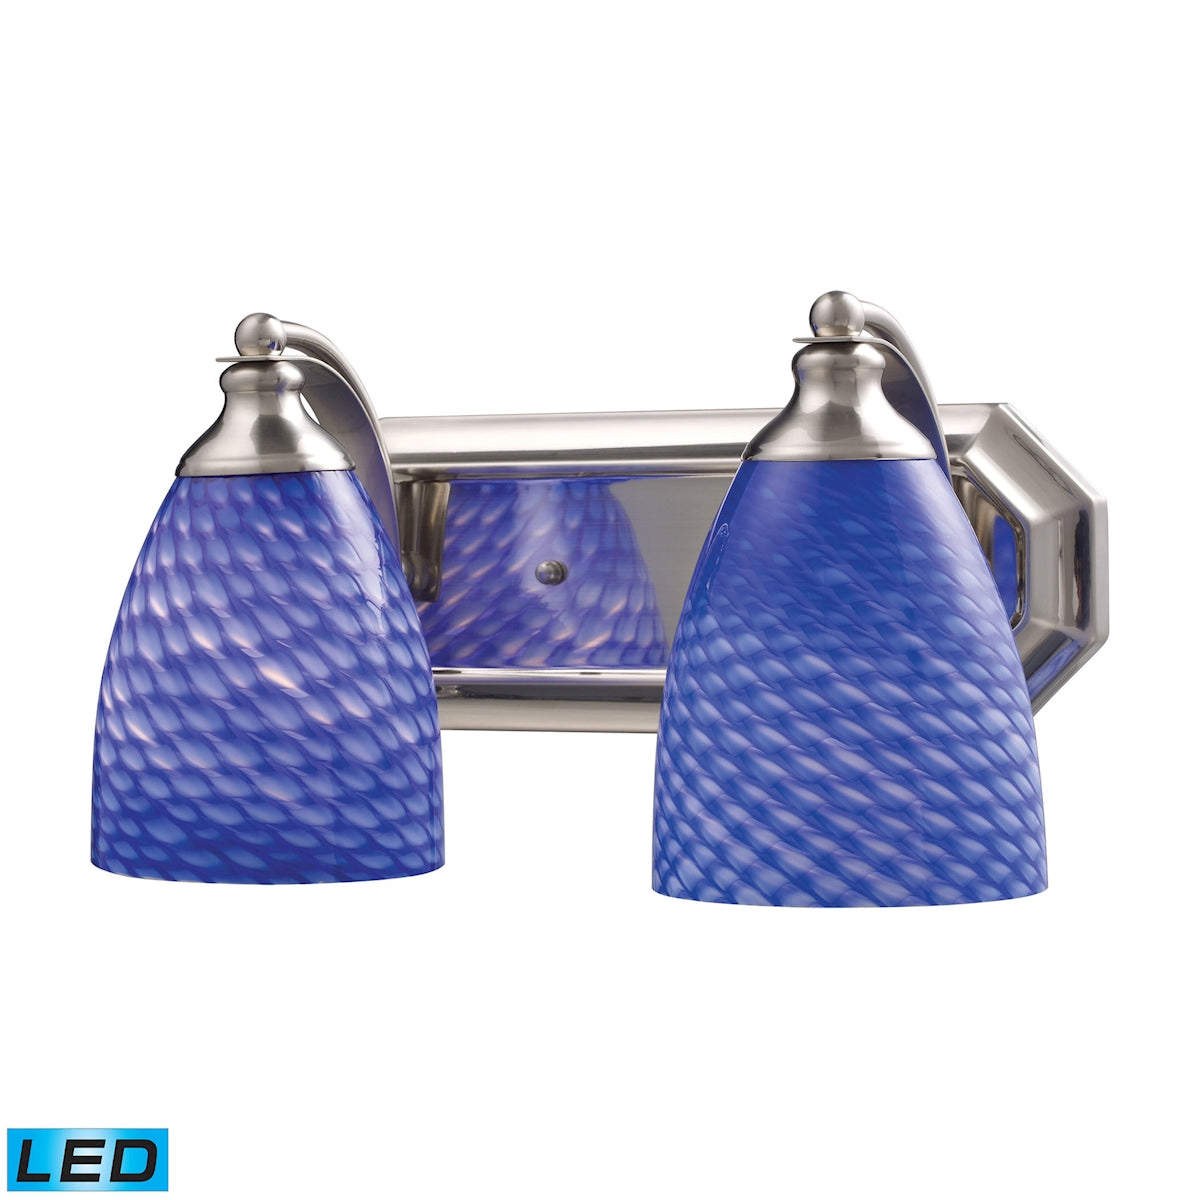 Mix-N-Match Vanity 2-Light Wall Lamp in Satin Nickel with Sapphire Glass - Includes LED Bulbs